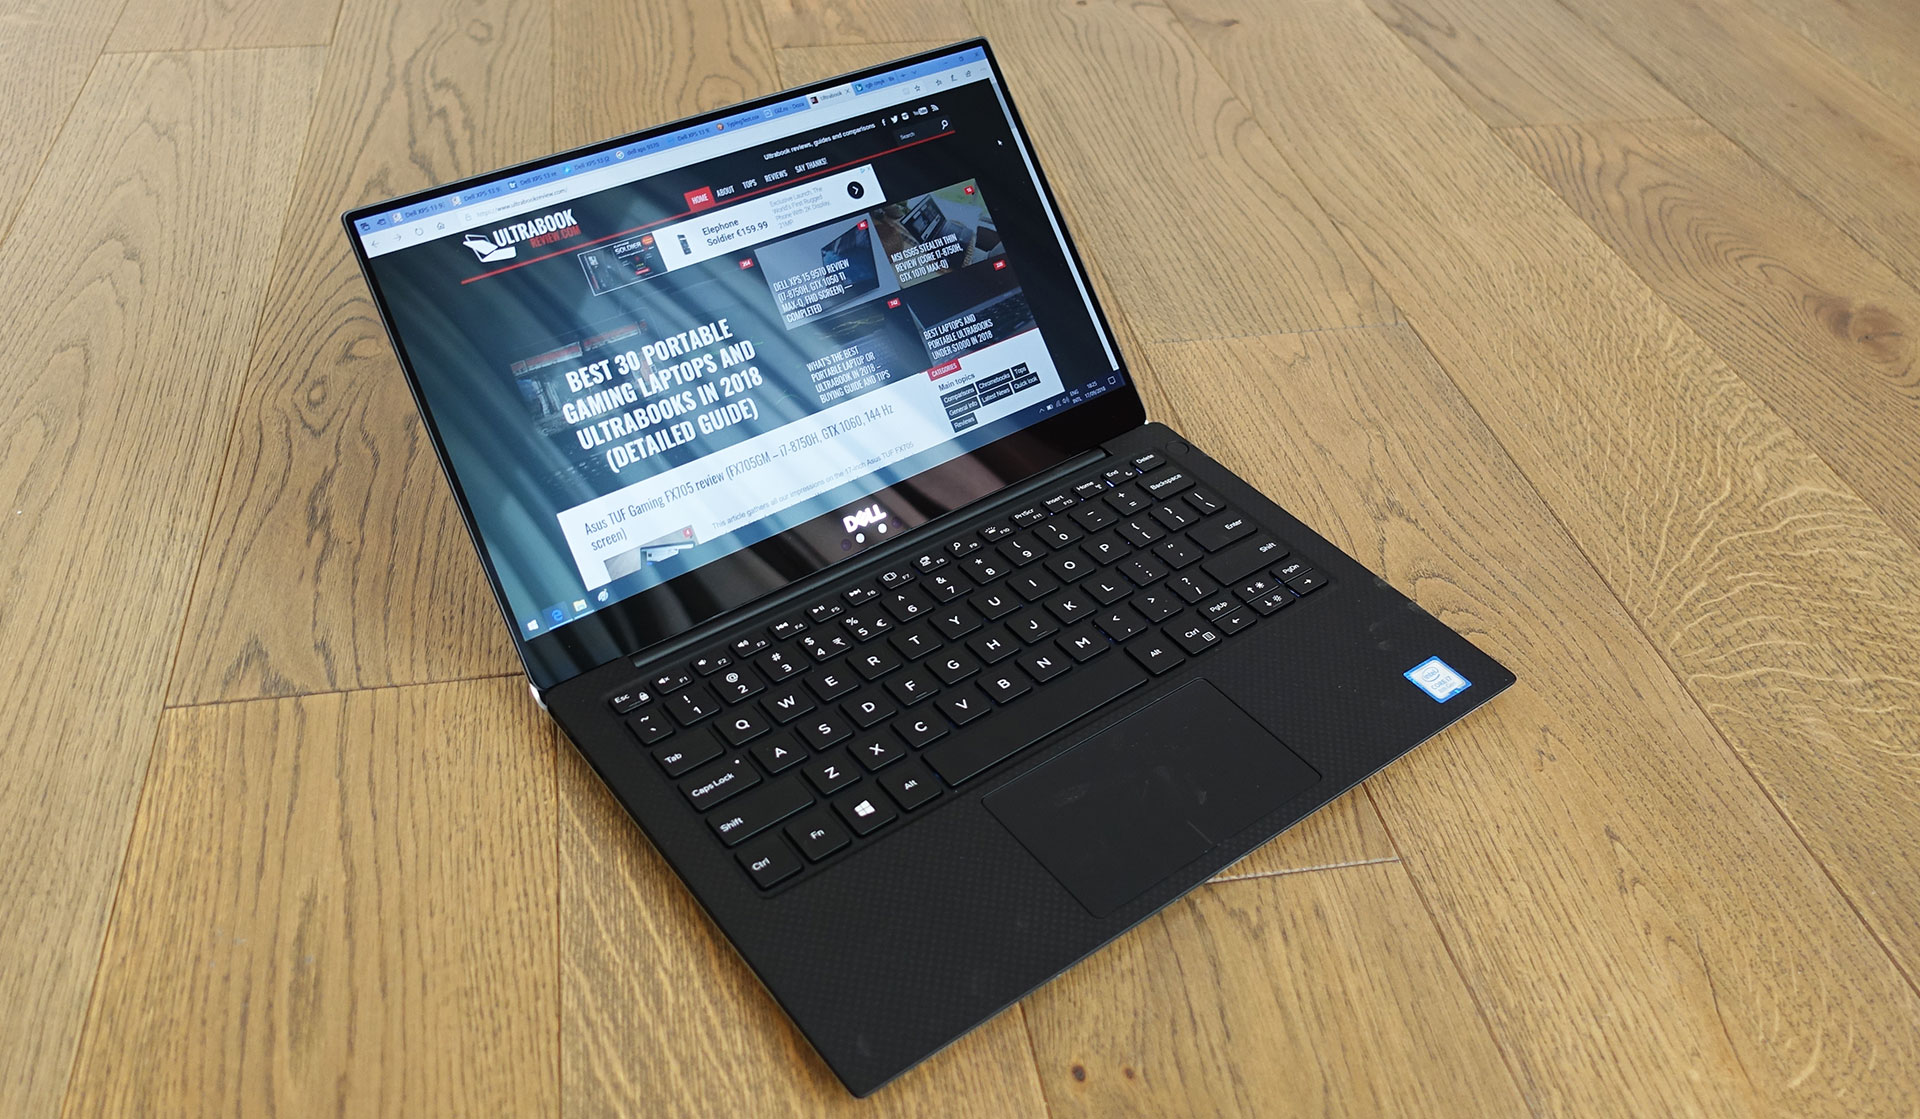 Dell XPS 13 9370 review (i7-8550U, FHD screen) - an upgrade, but ...